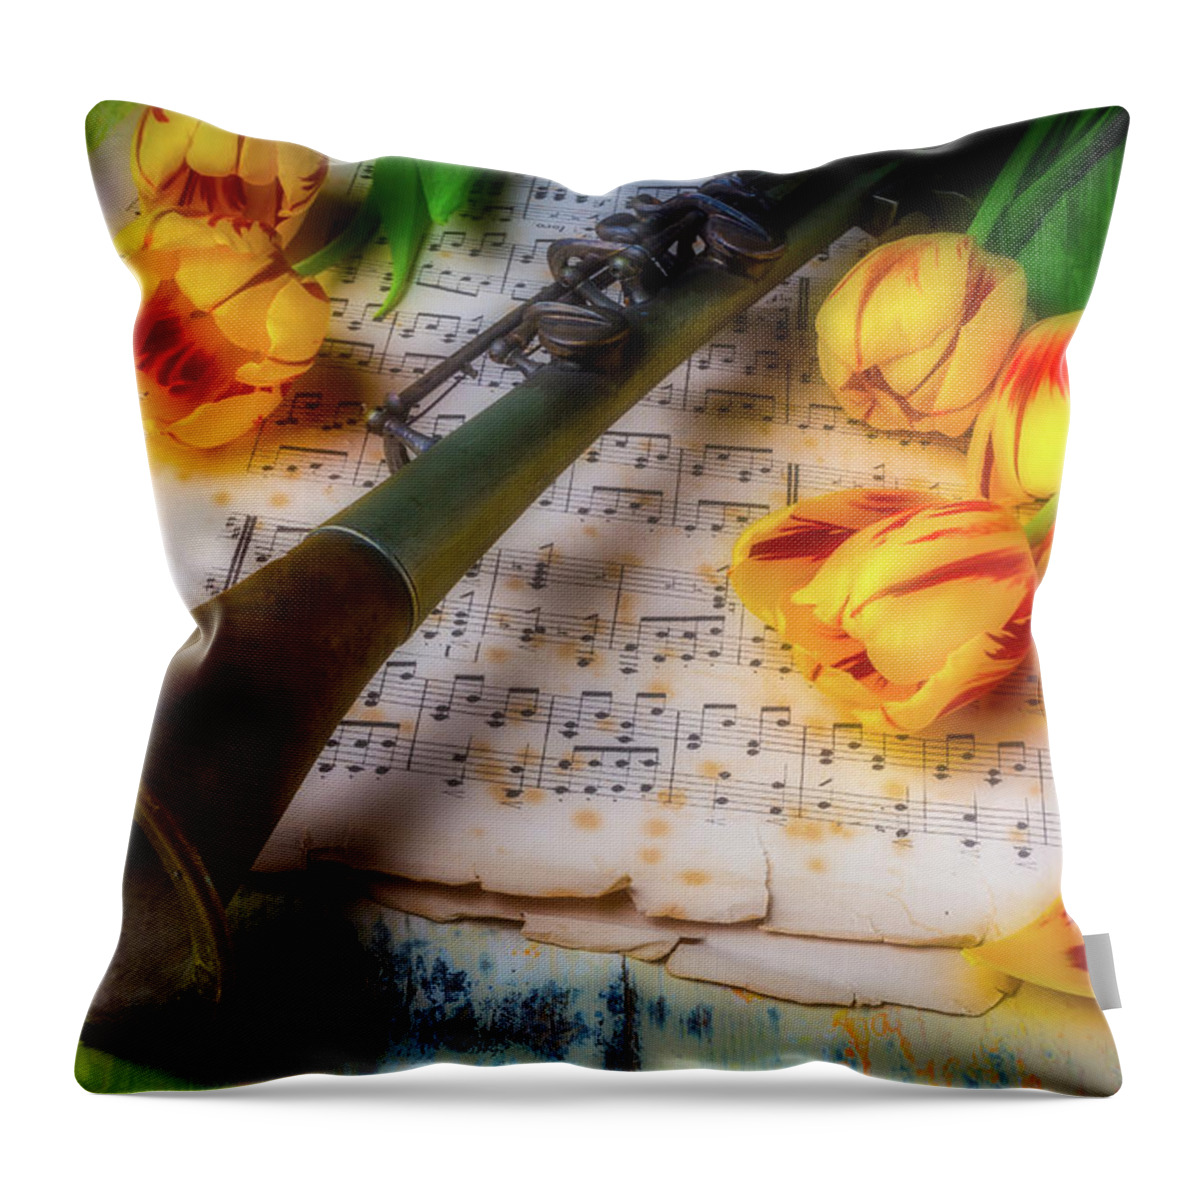 Old Throw Pillow featuring the photograph Music Still Life by Garry Gay